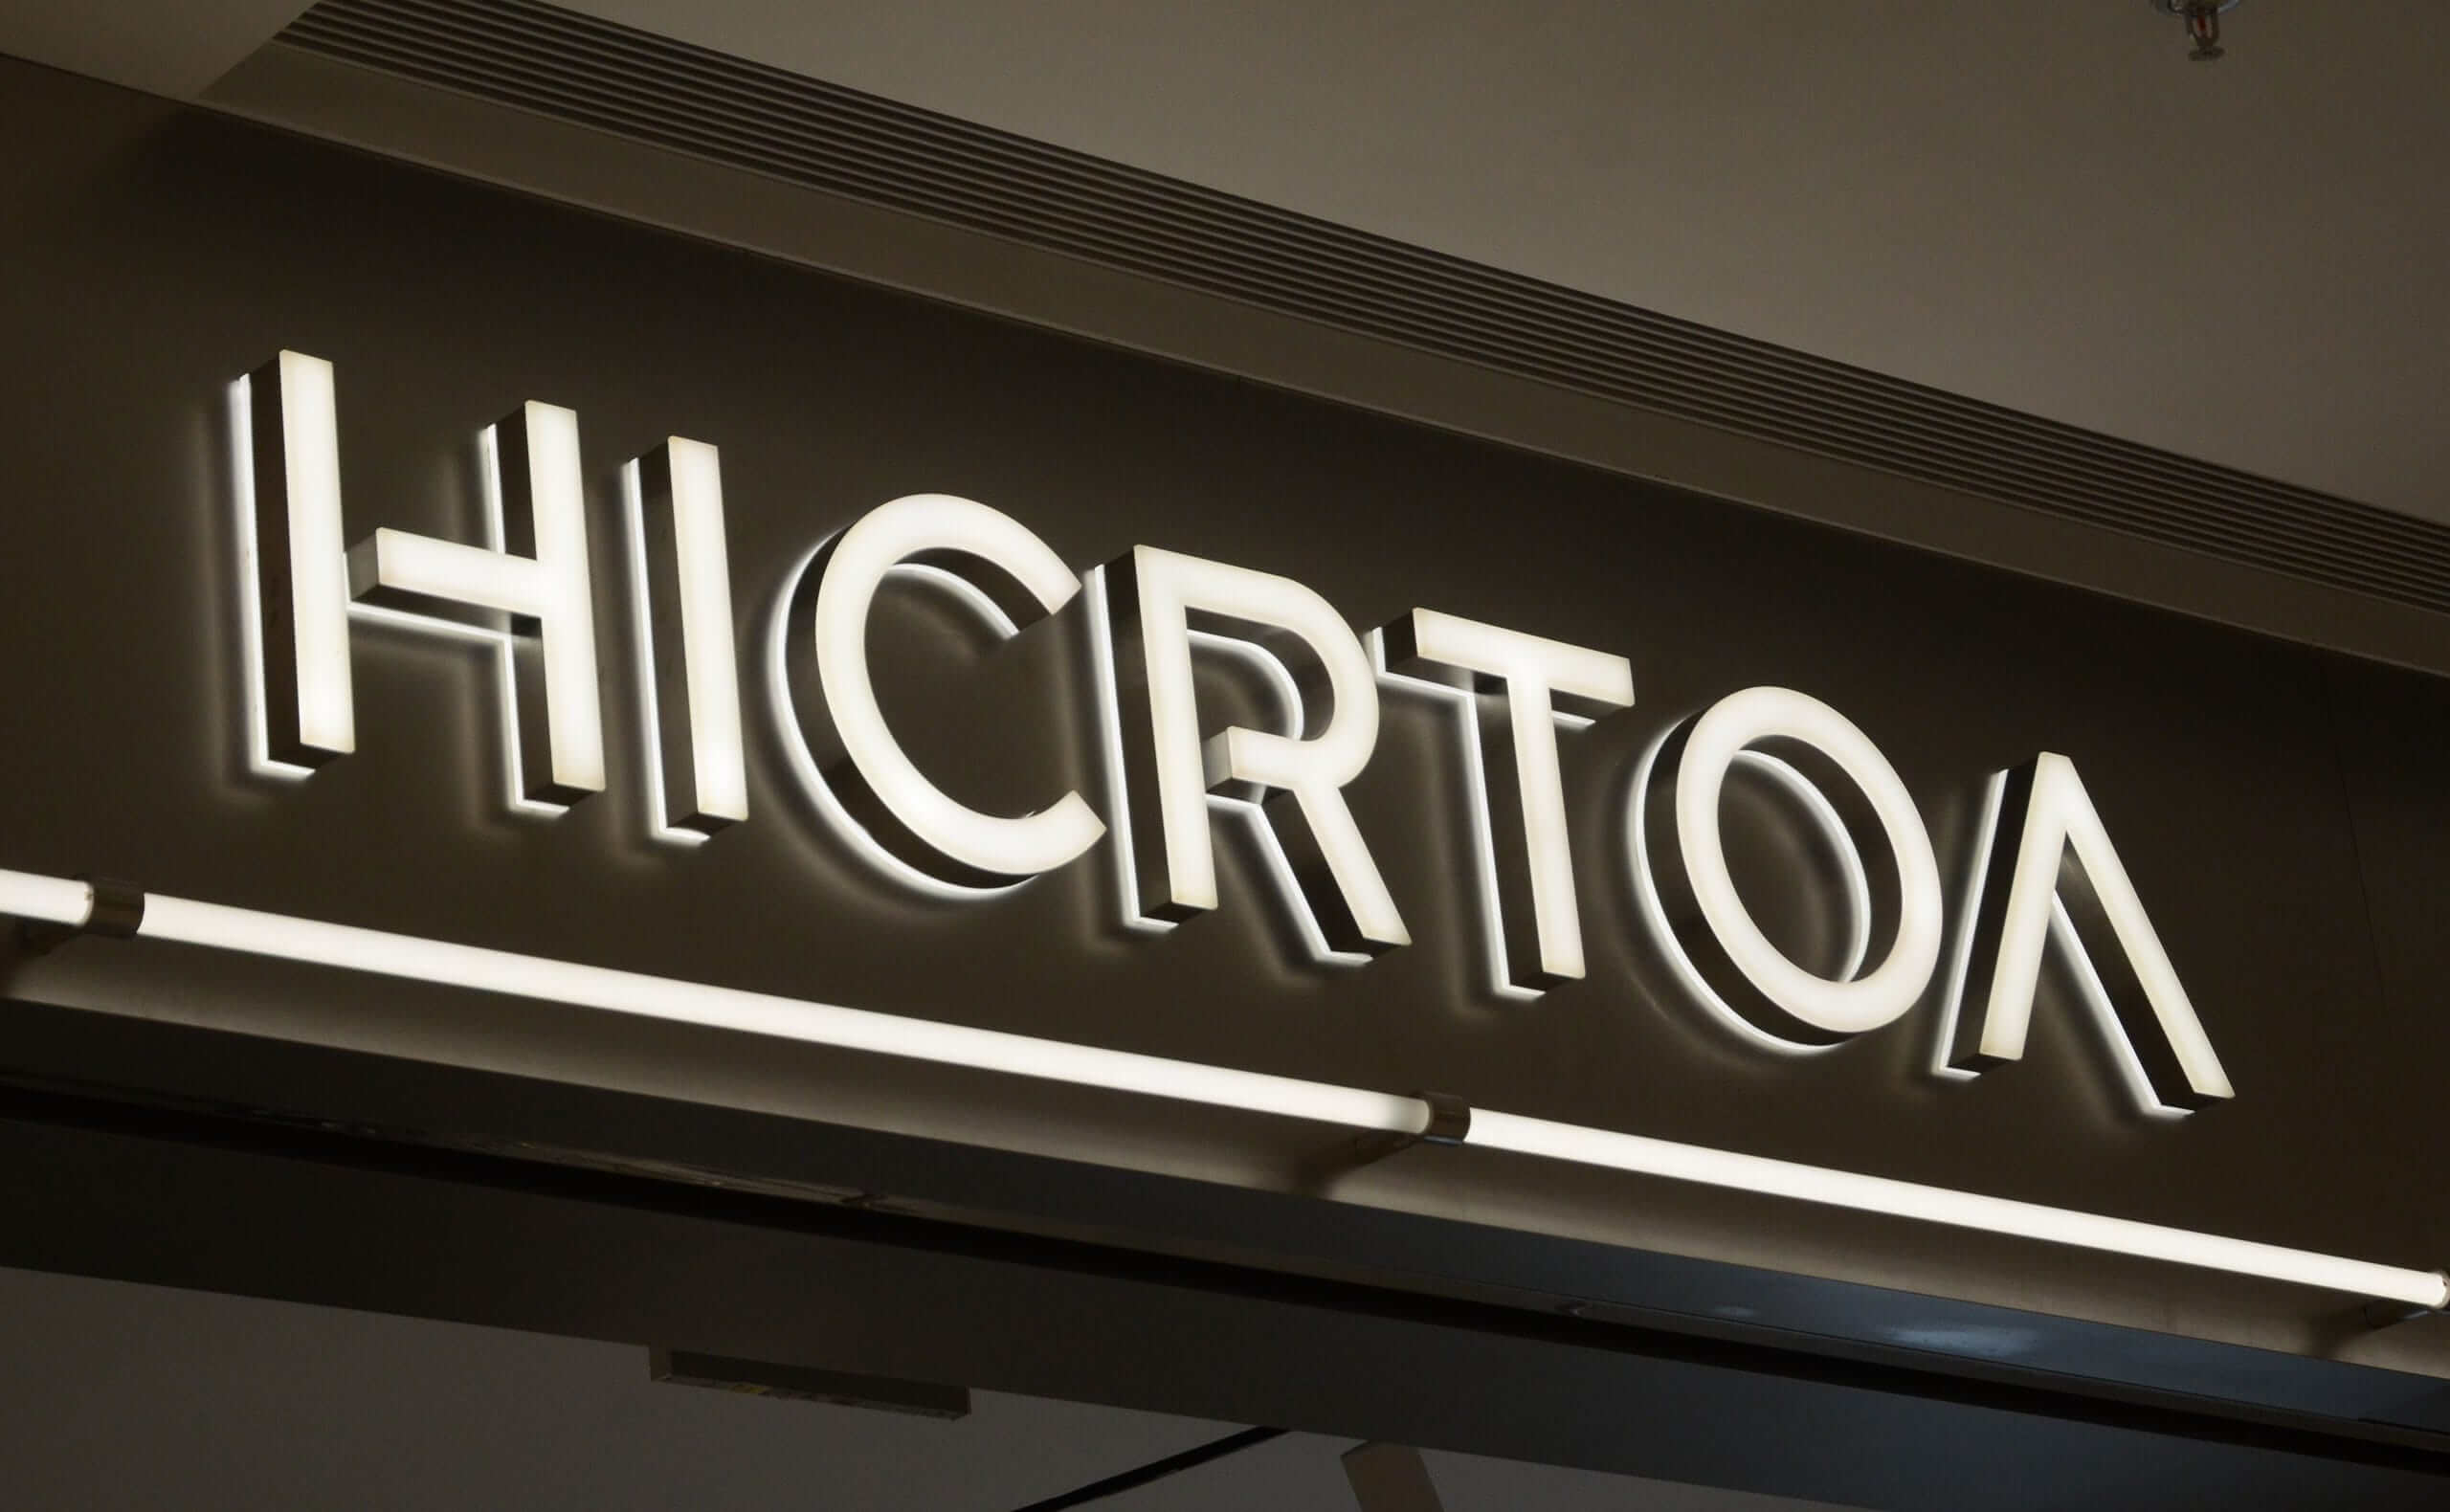 Metal Front and Backlit Channel Letters For Hicrtoa